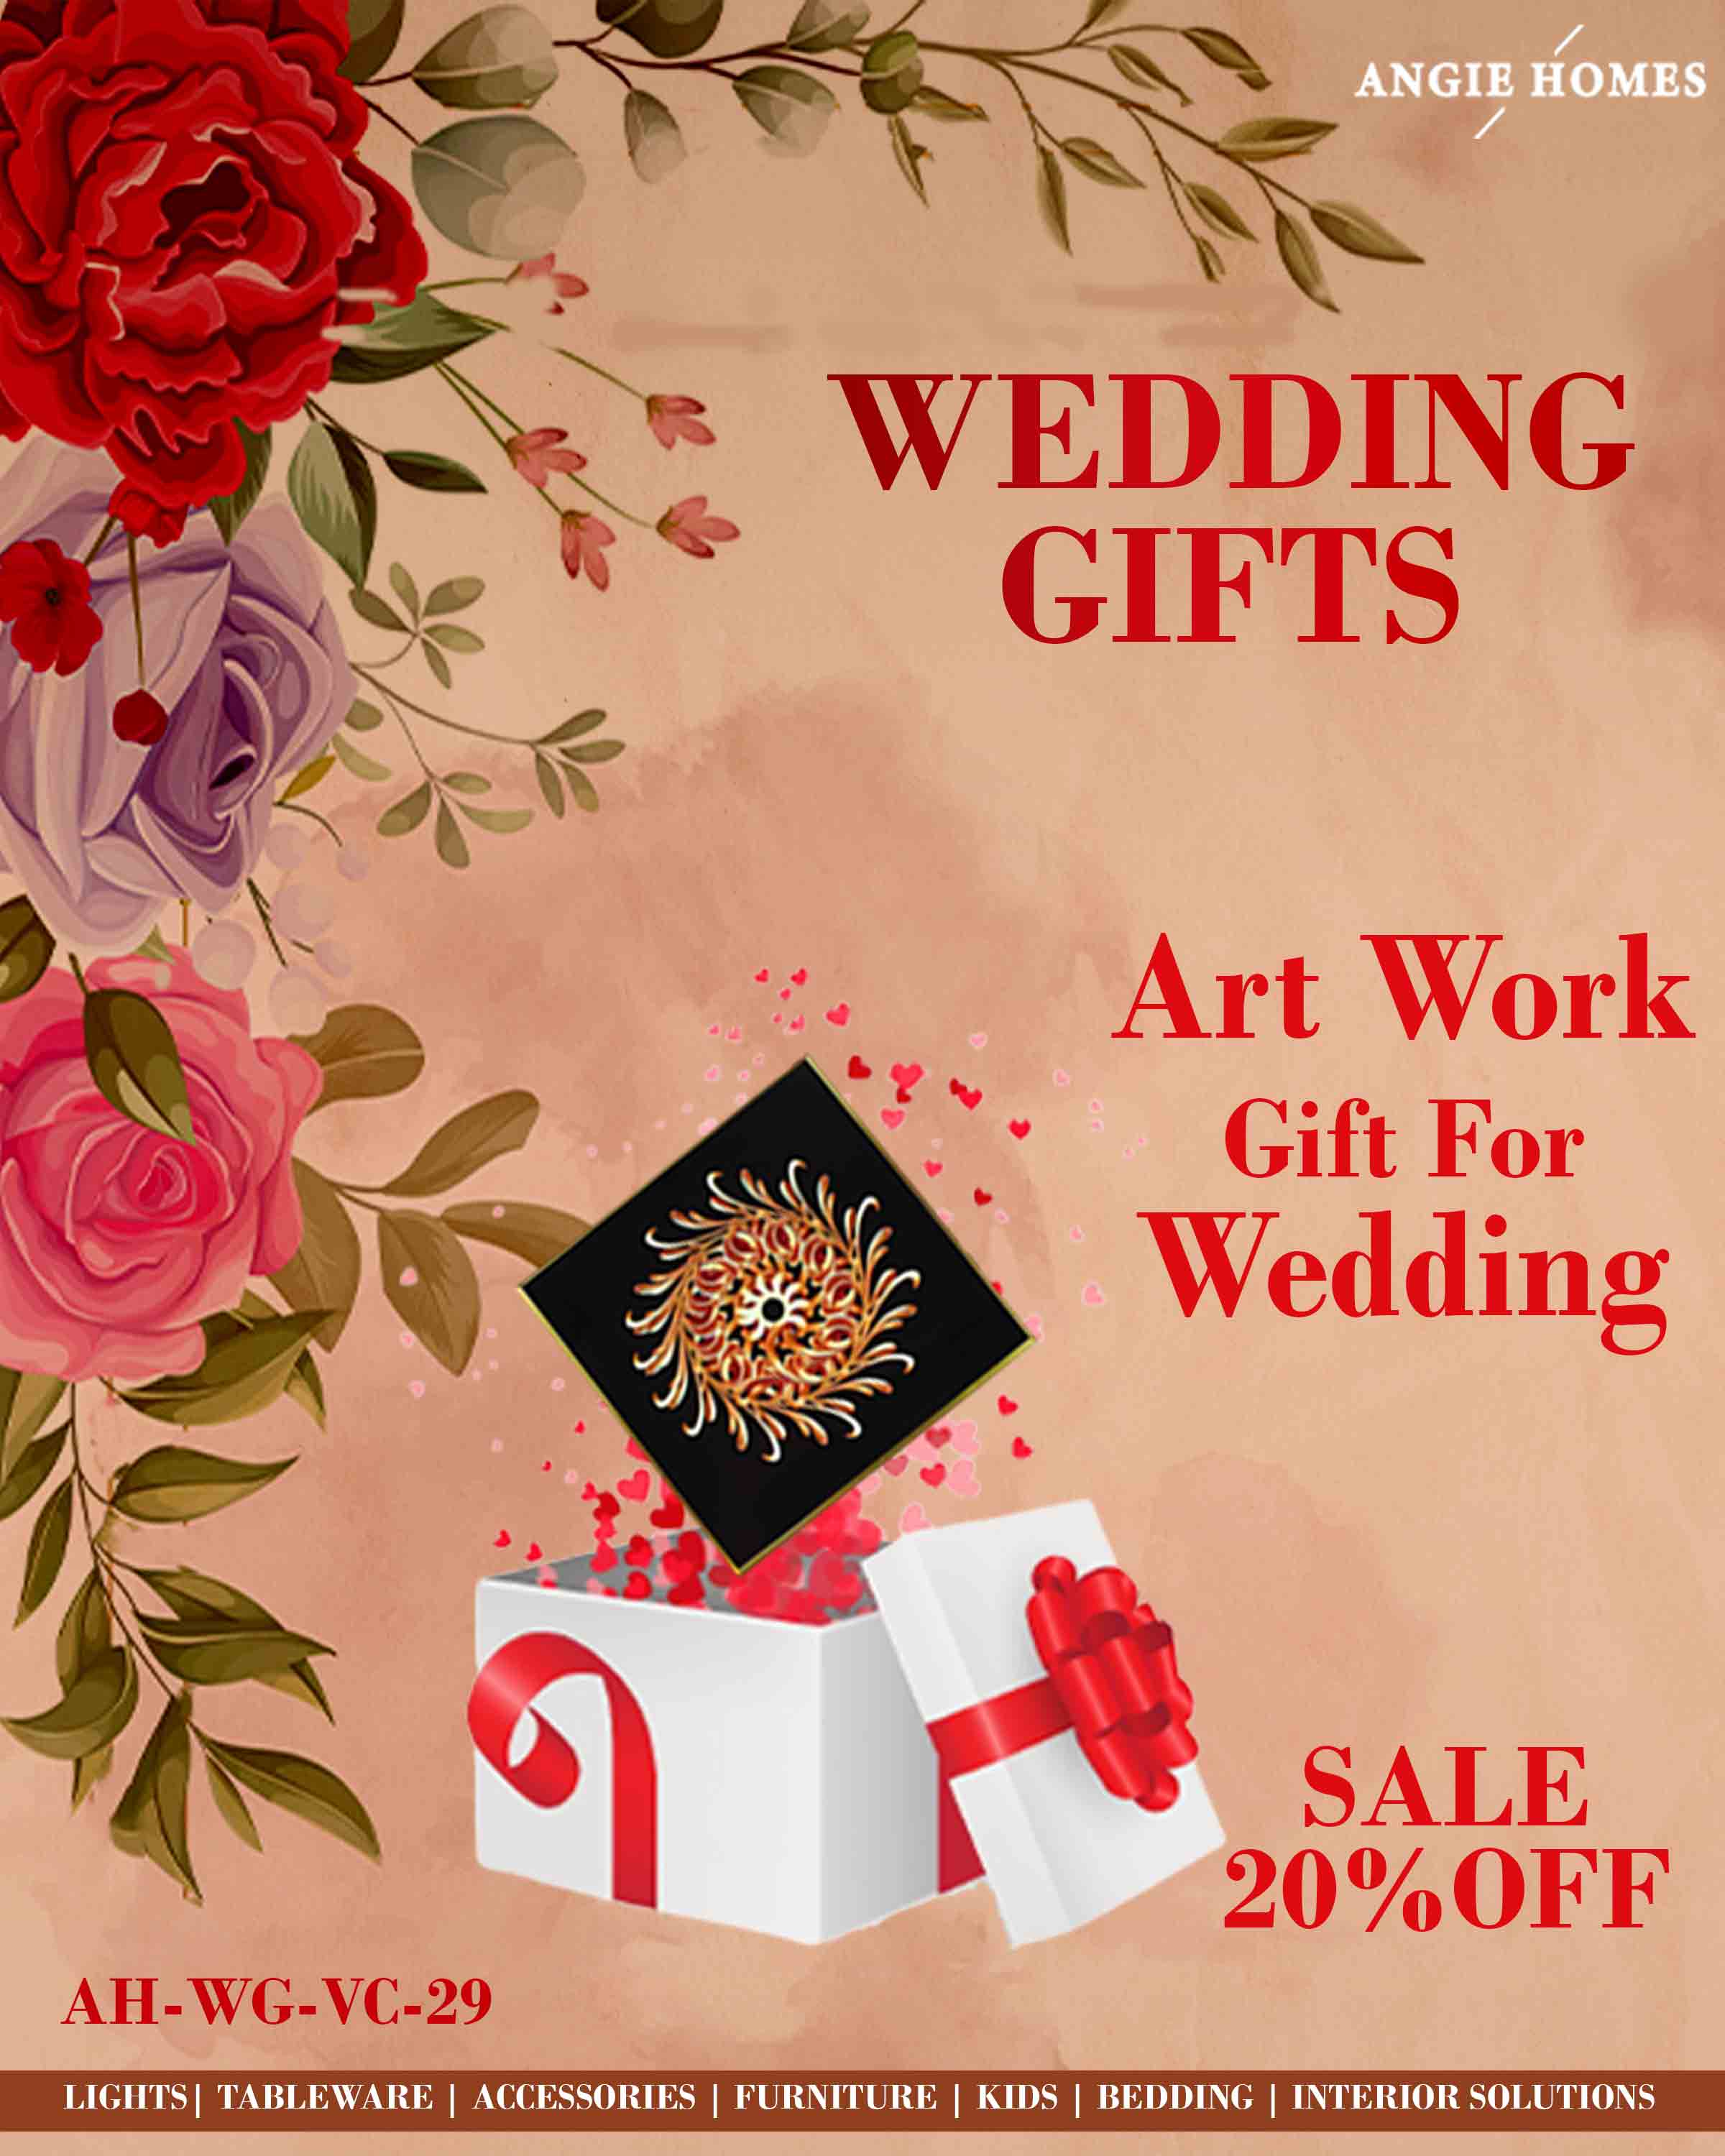 ART WORK FOR WEDDING GIFTS | MARRIAGE GIFT VOUCHER CARD | HOME DECOR PAINTINGS ANGIE HOMES